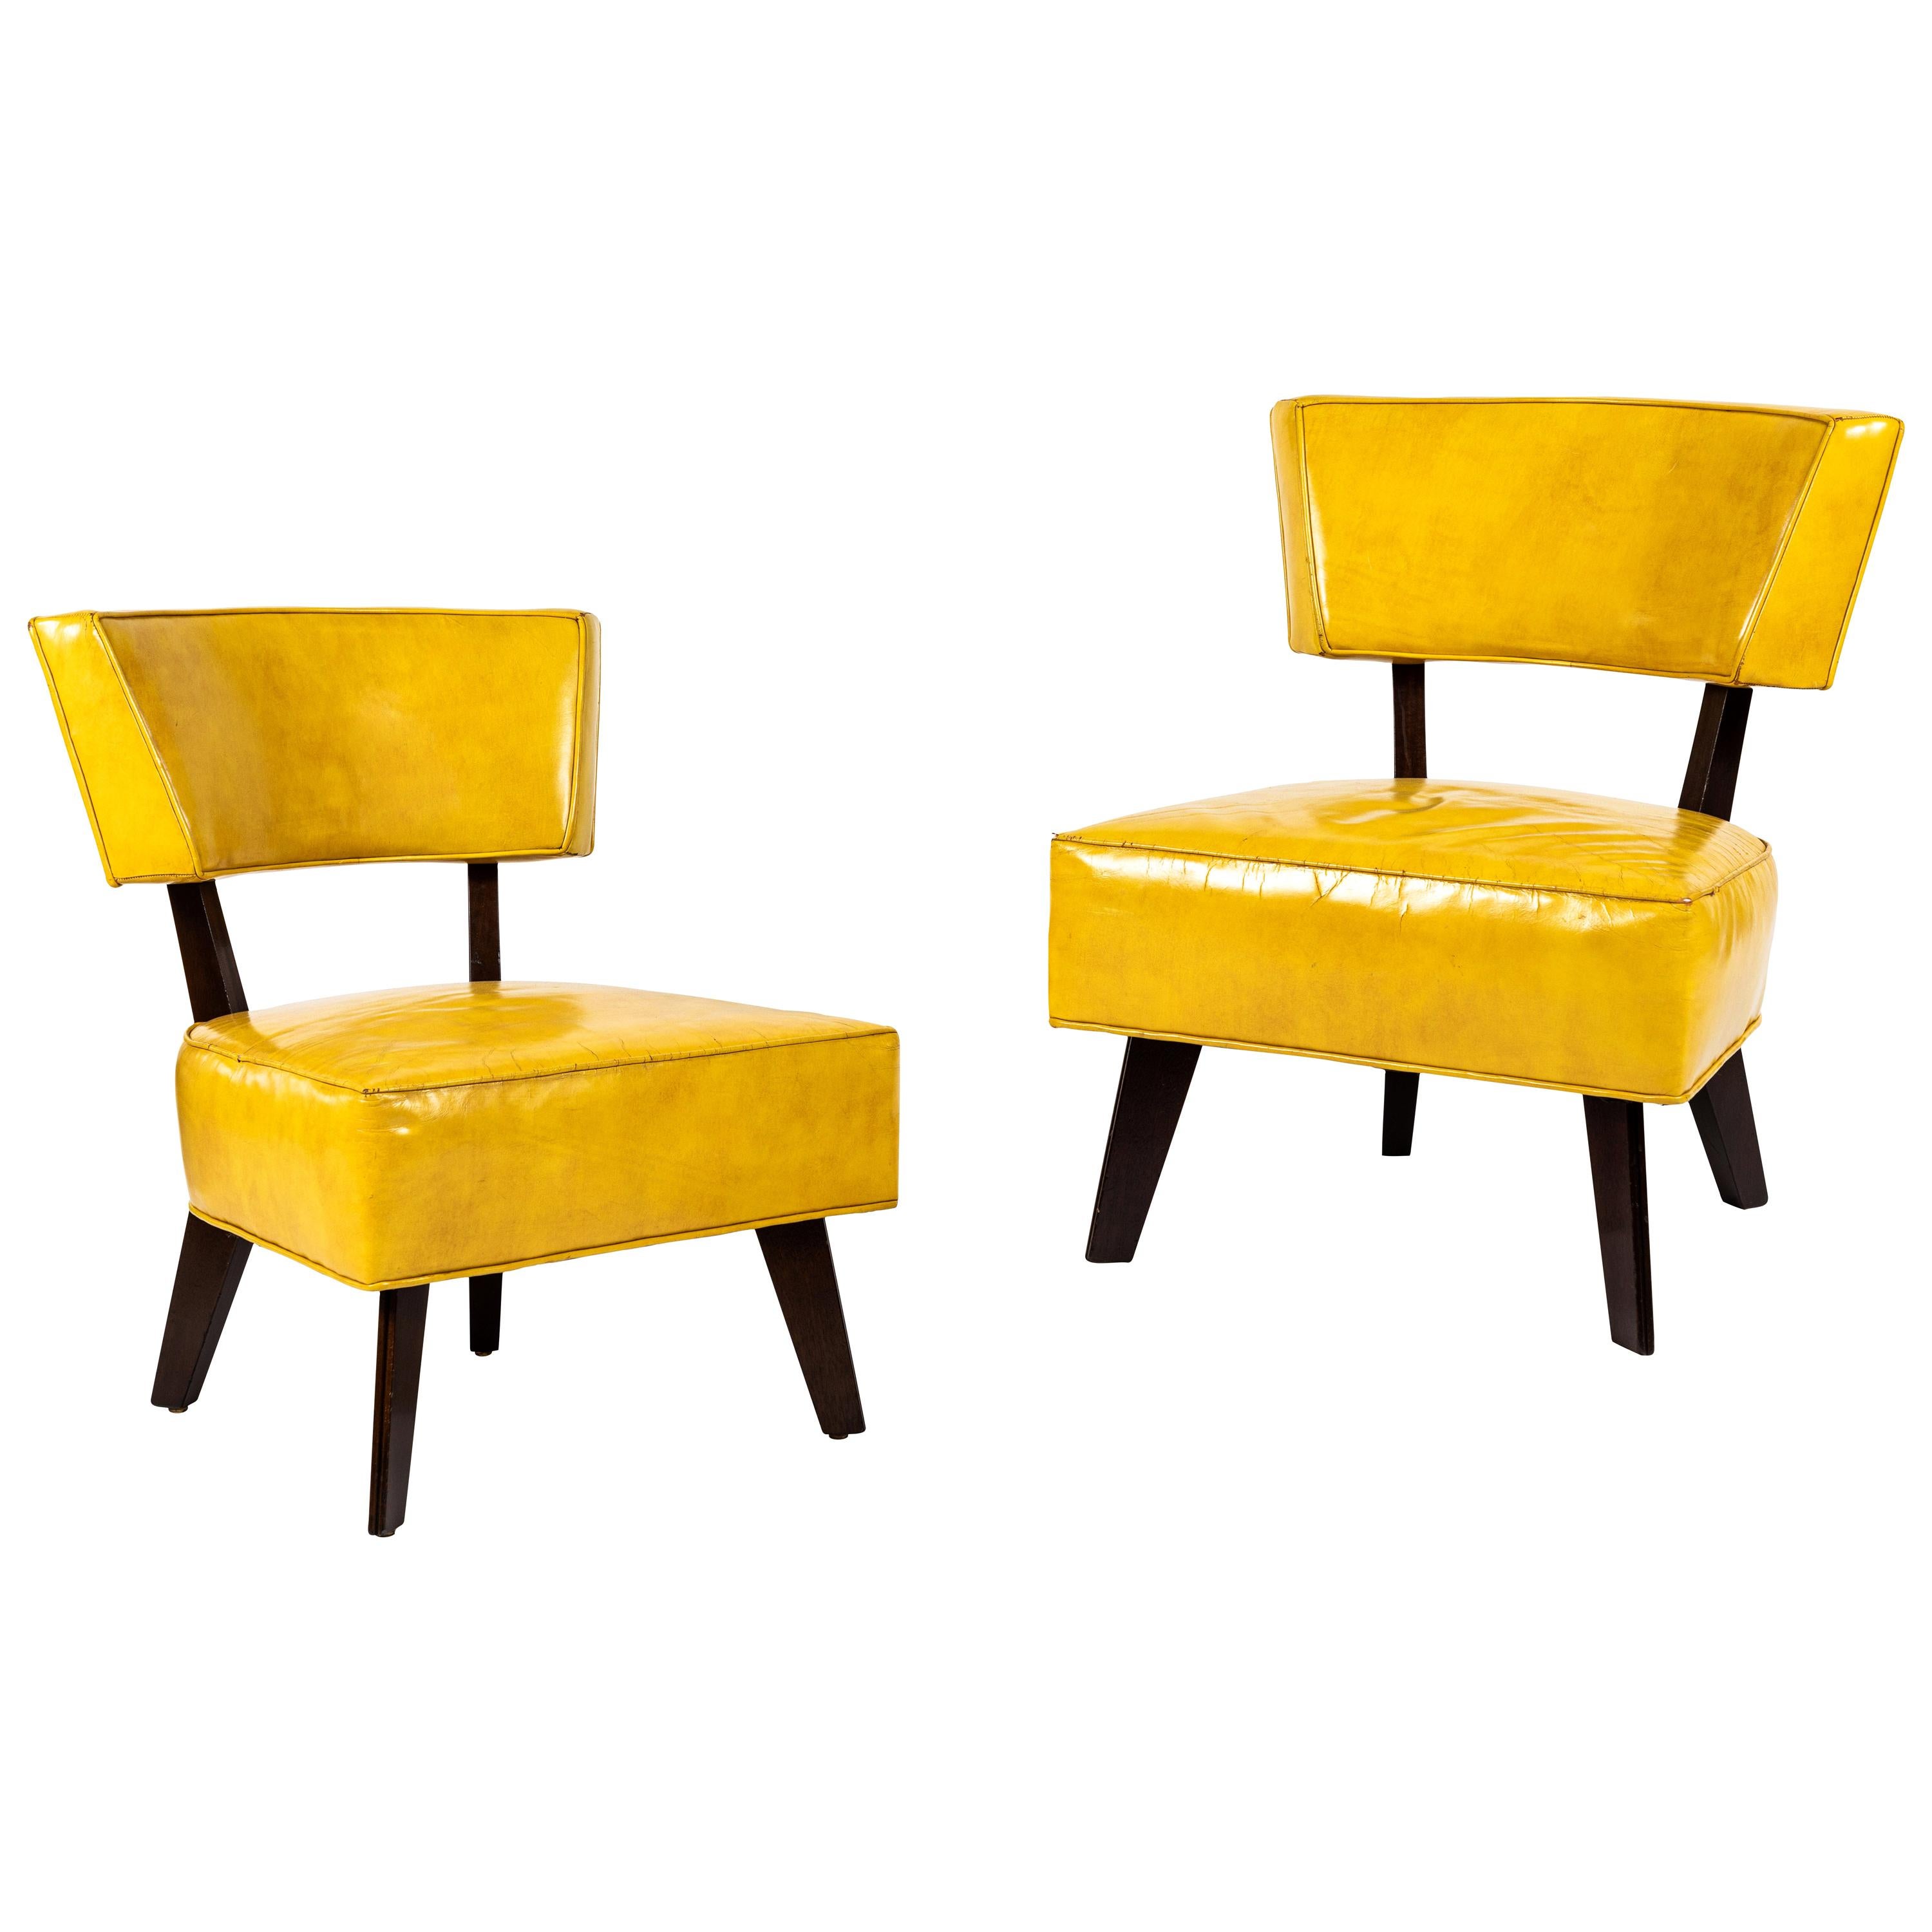 Pair of Low Chairs Designed by William Haines